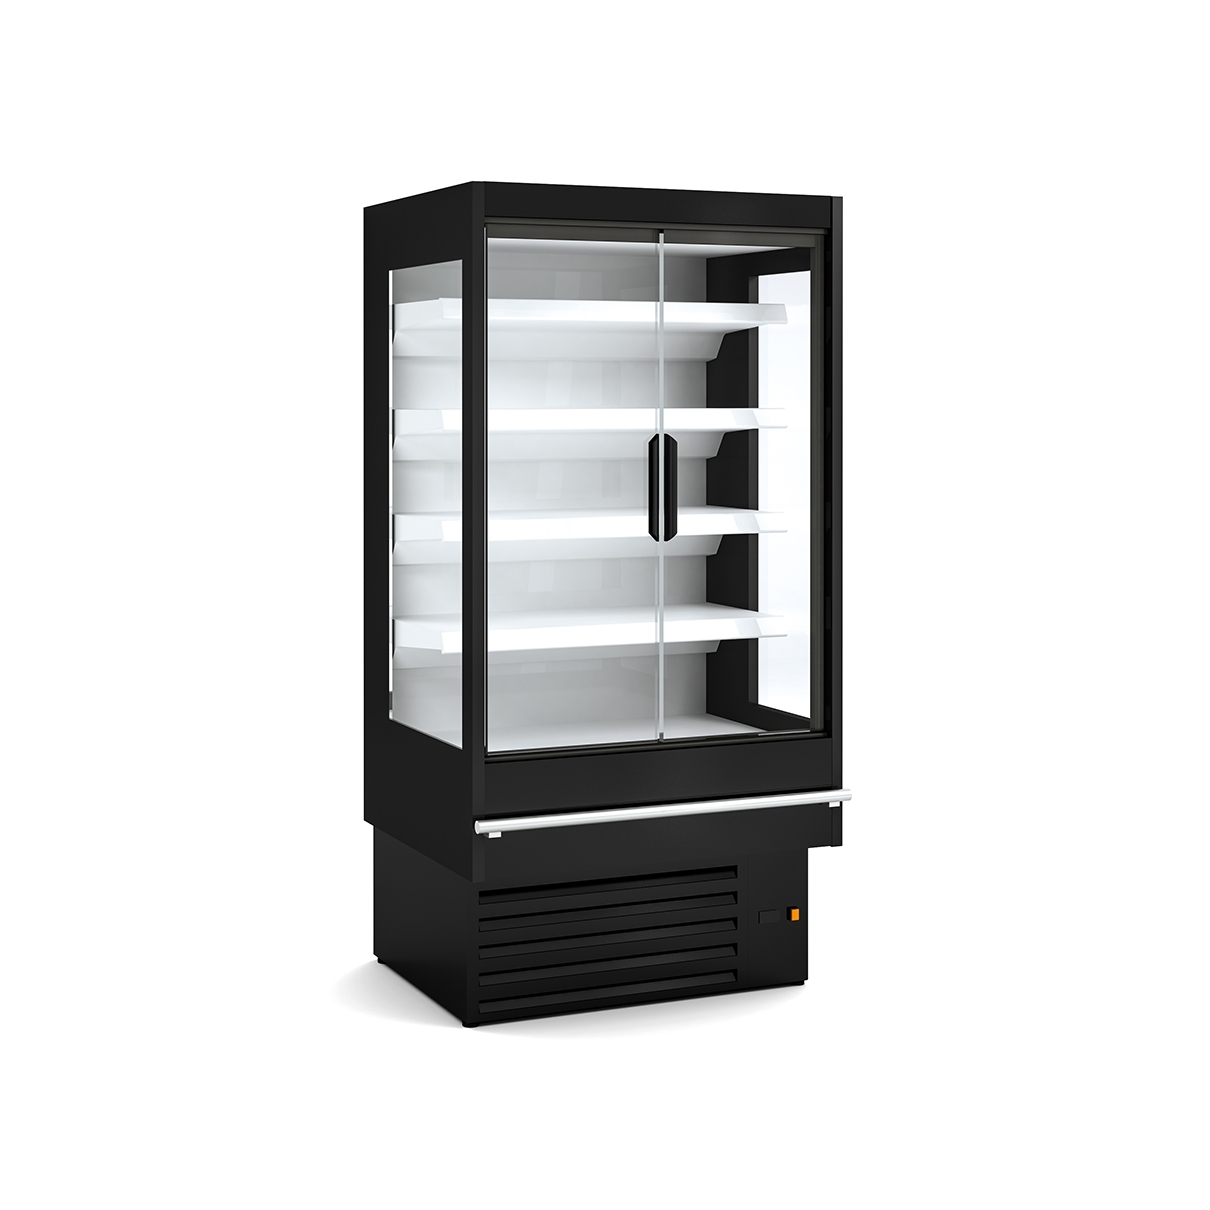 copy of REFRIGERATED WALL-MOUNTED DISPLAY CABINET HDG0 M1